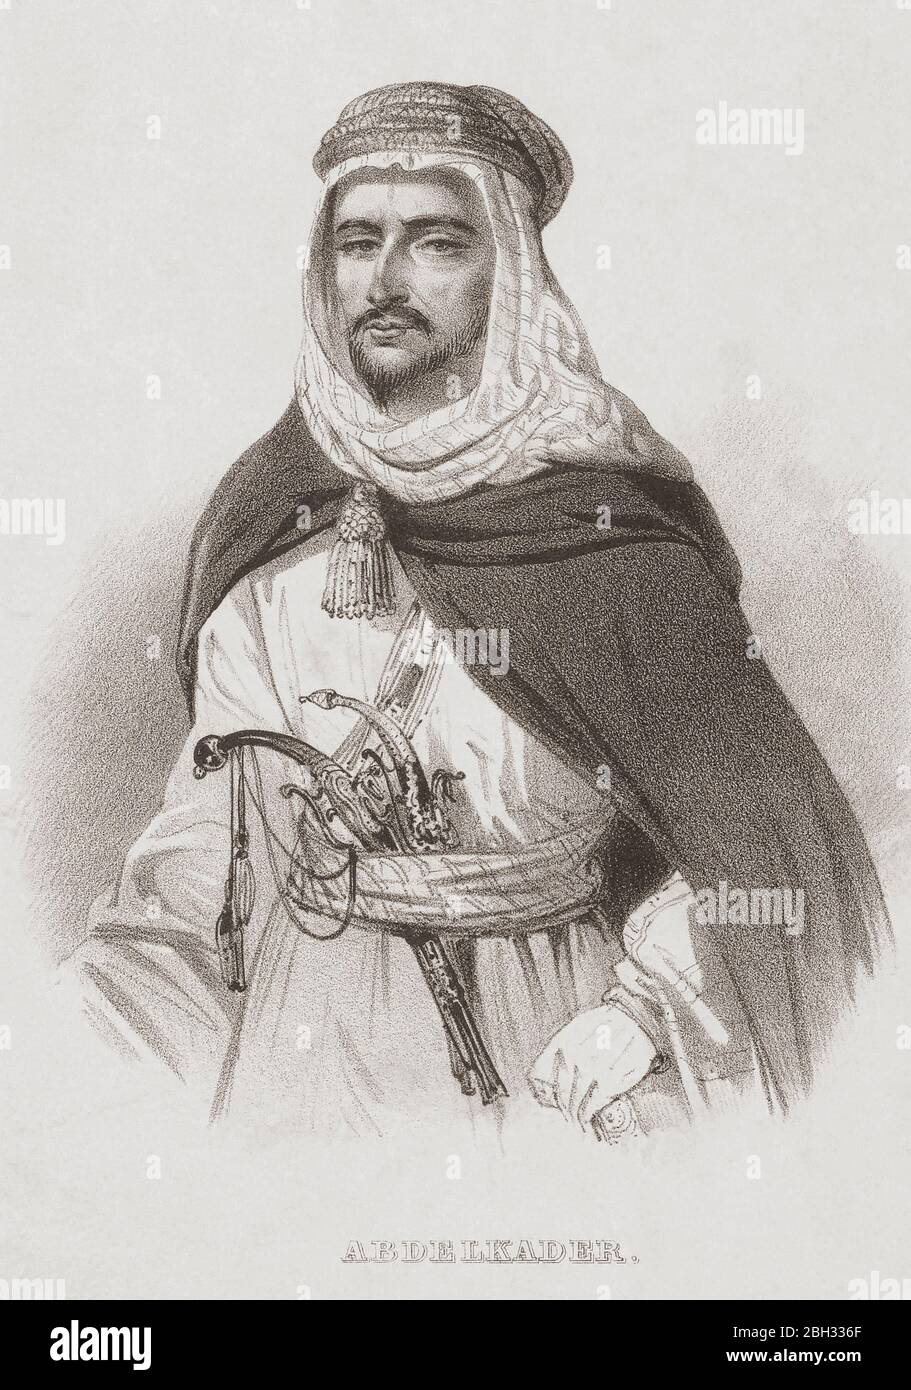 Abdelkader ibn Muhieddine, 1808 – 1883.  Also known as Emir Abdelkader, Abdelkader El Djezairi and Abd al-Qadir.  Algerian leader who led struggle against 19th century French colonial invasion.  After a 19th century work by an unknown artist. Stock Photo